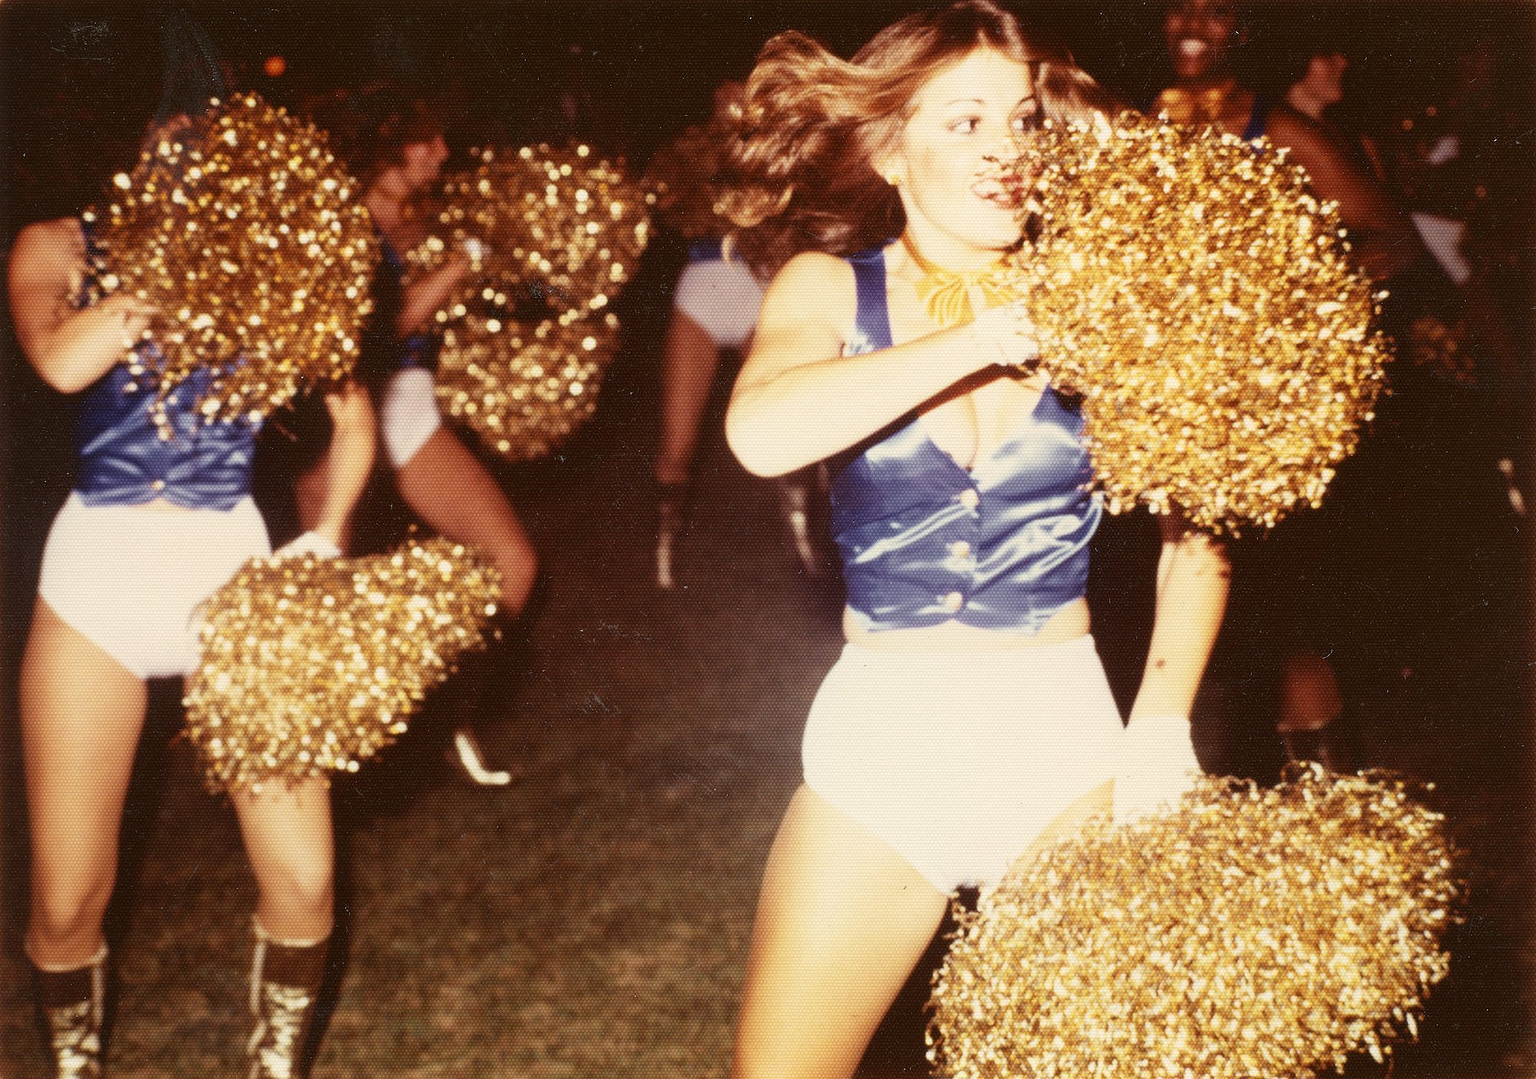 World Premiere Of A&E Indie Films’ SIDELINED - Cheerleading Controversy Documentary Will Air On LIFETIME Following Festival Run